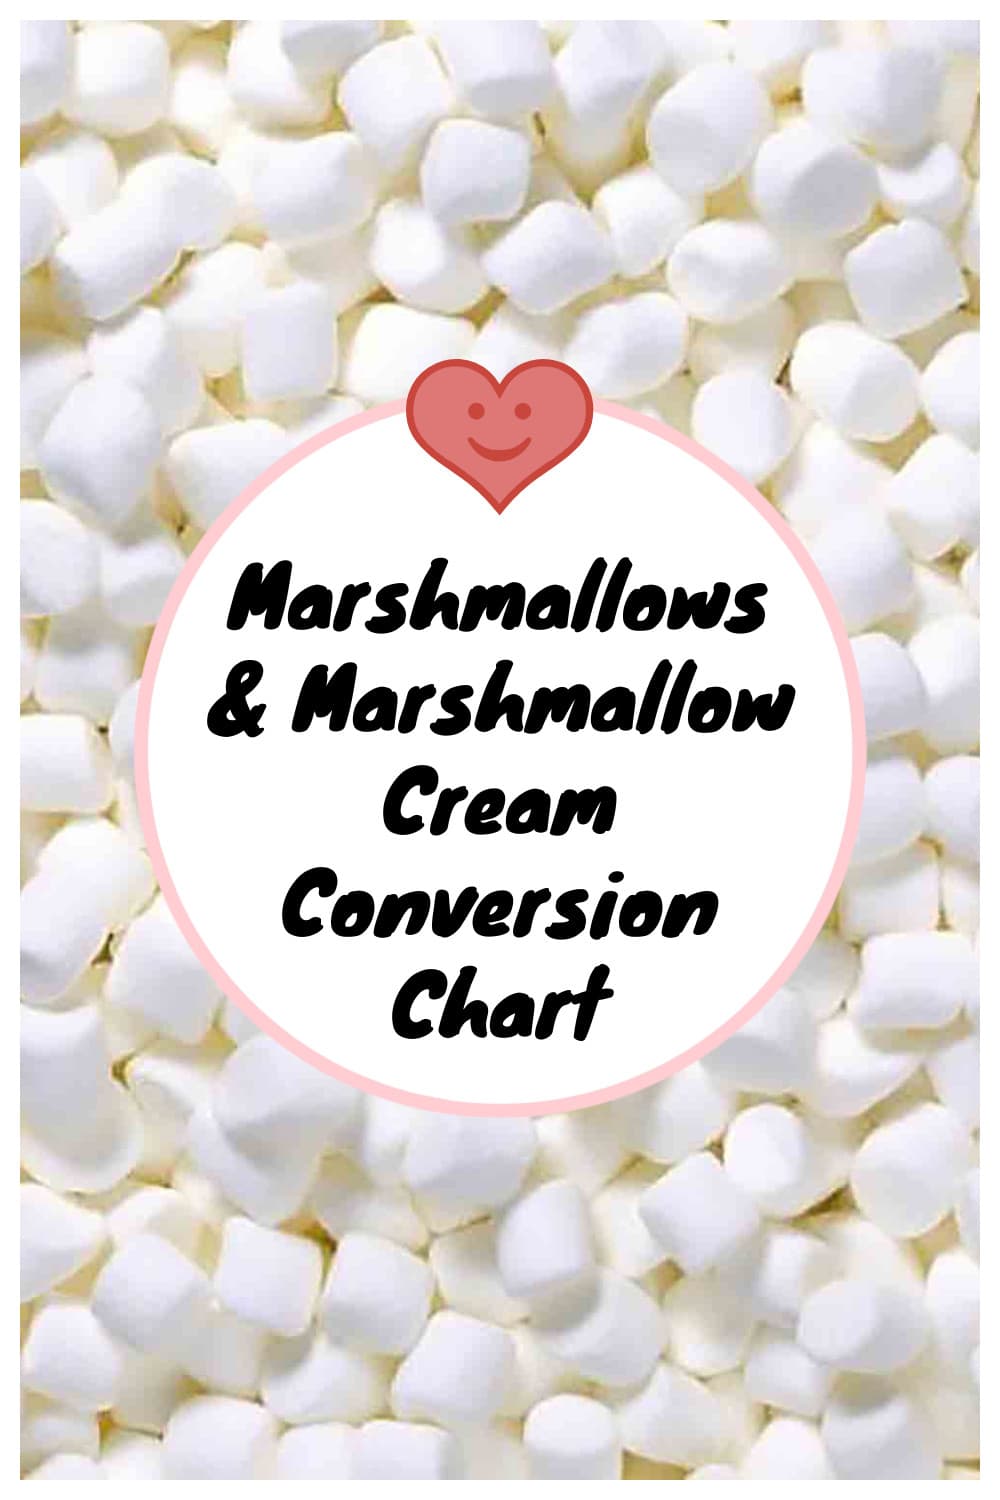 marshmallow creme and marshmallow conversions